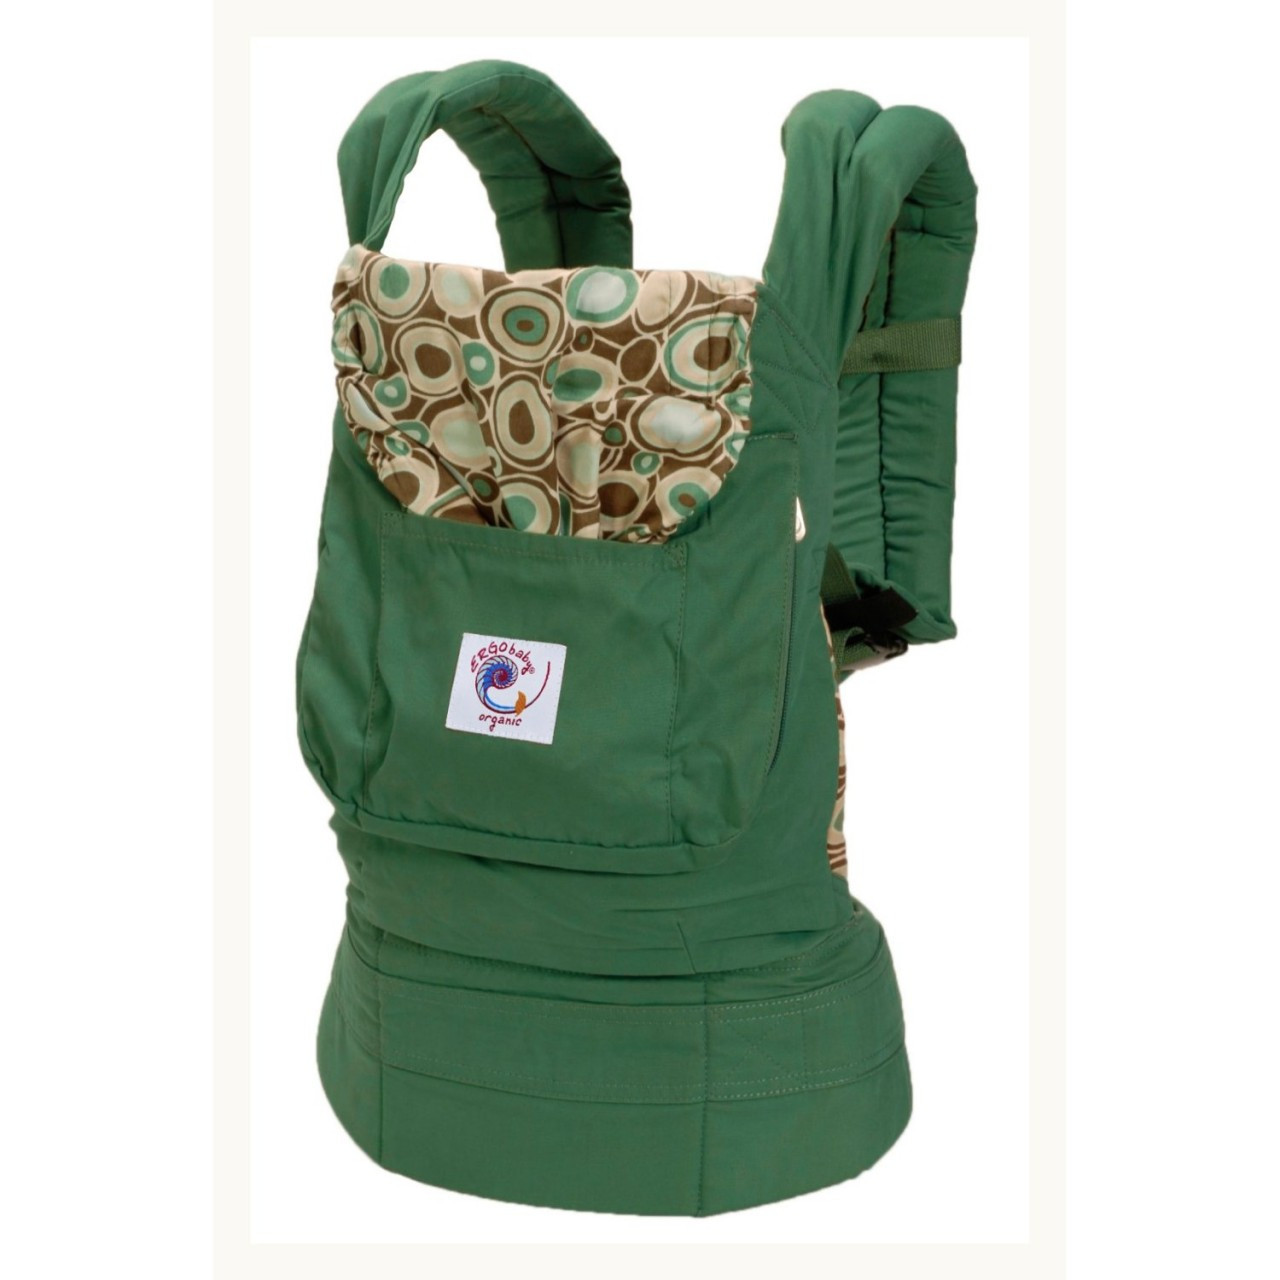 baby carrier green